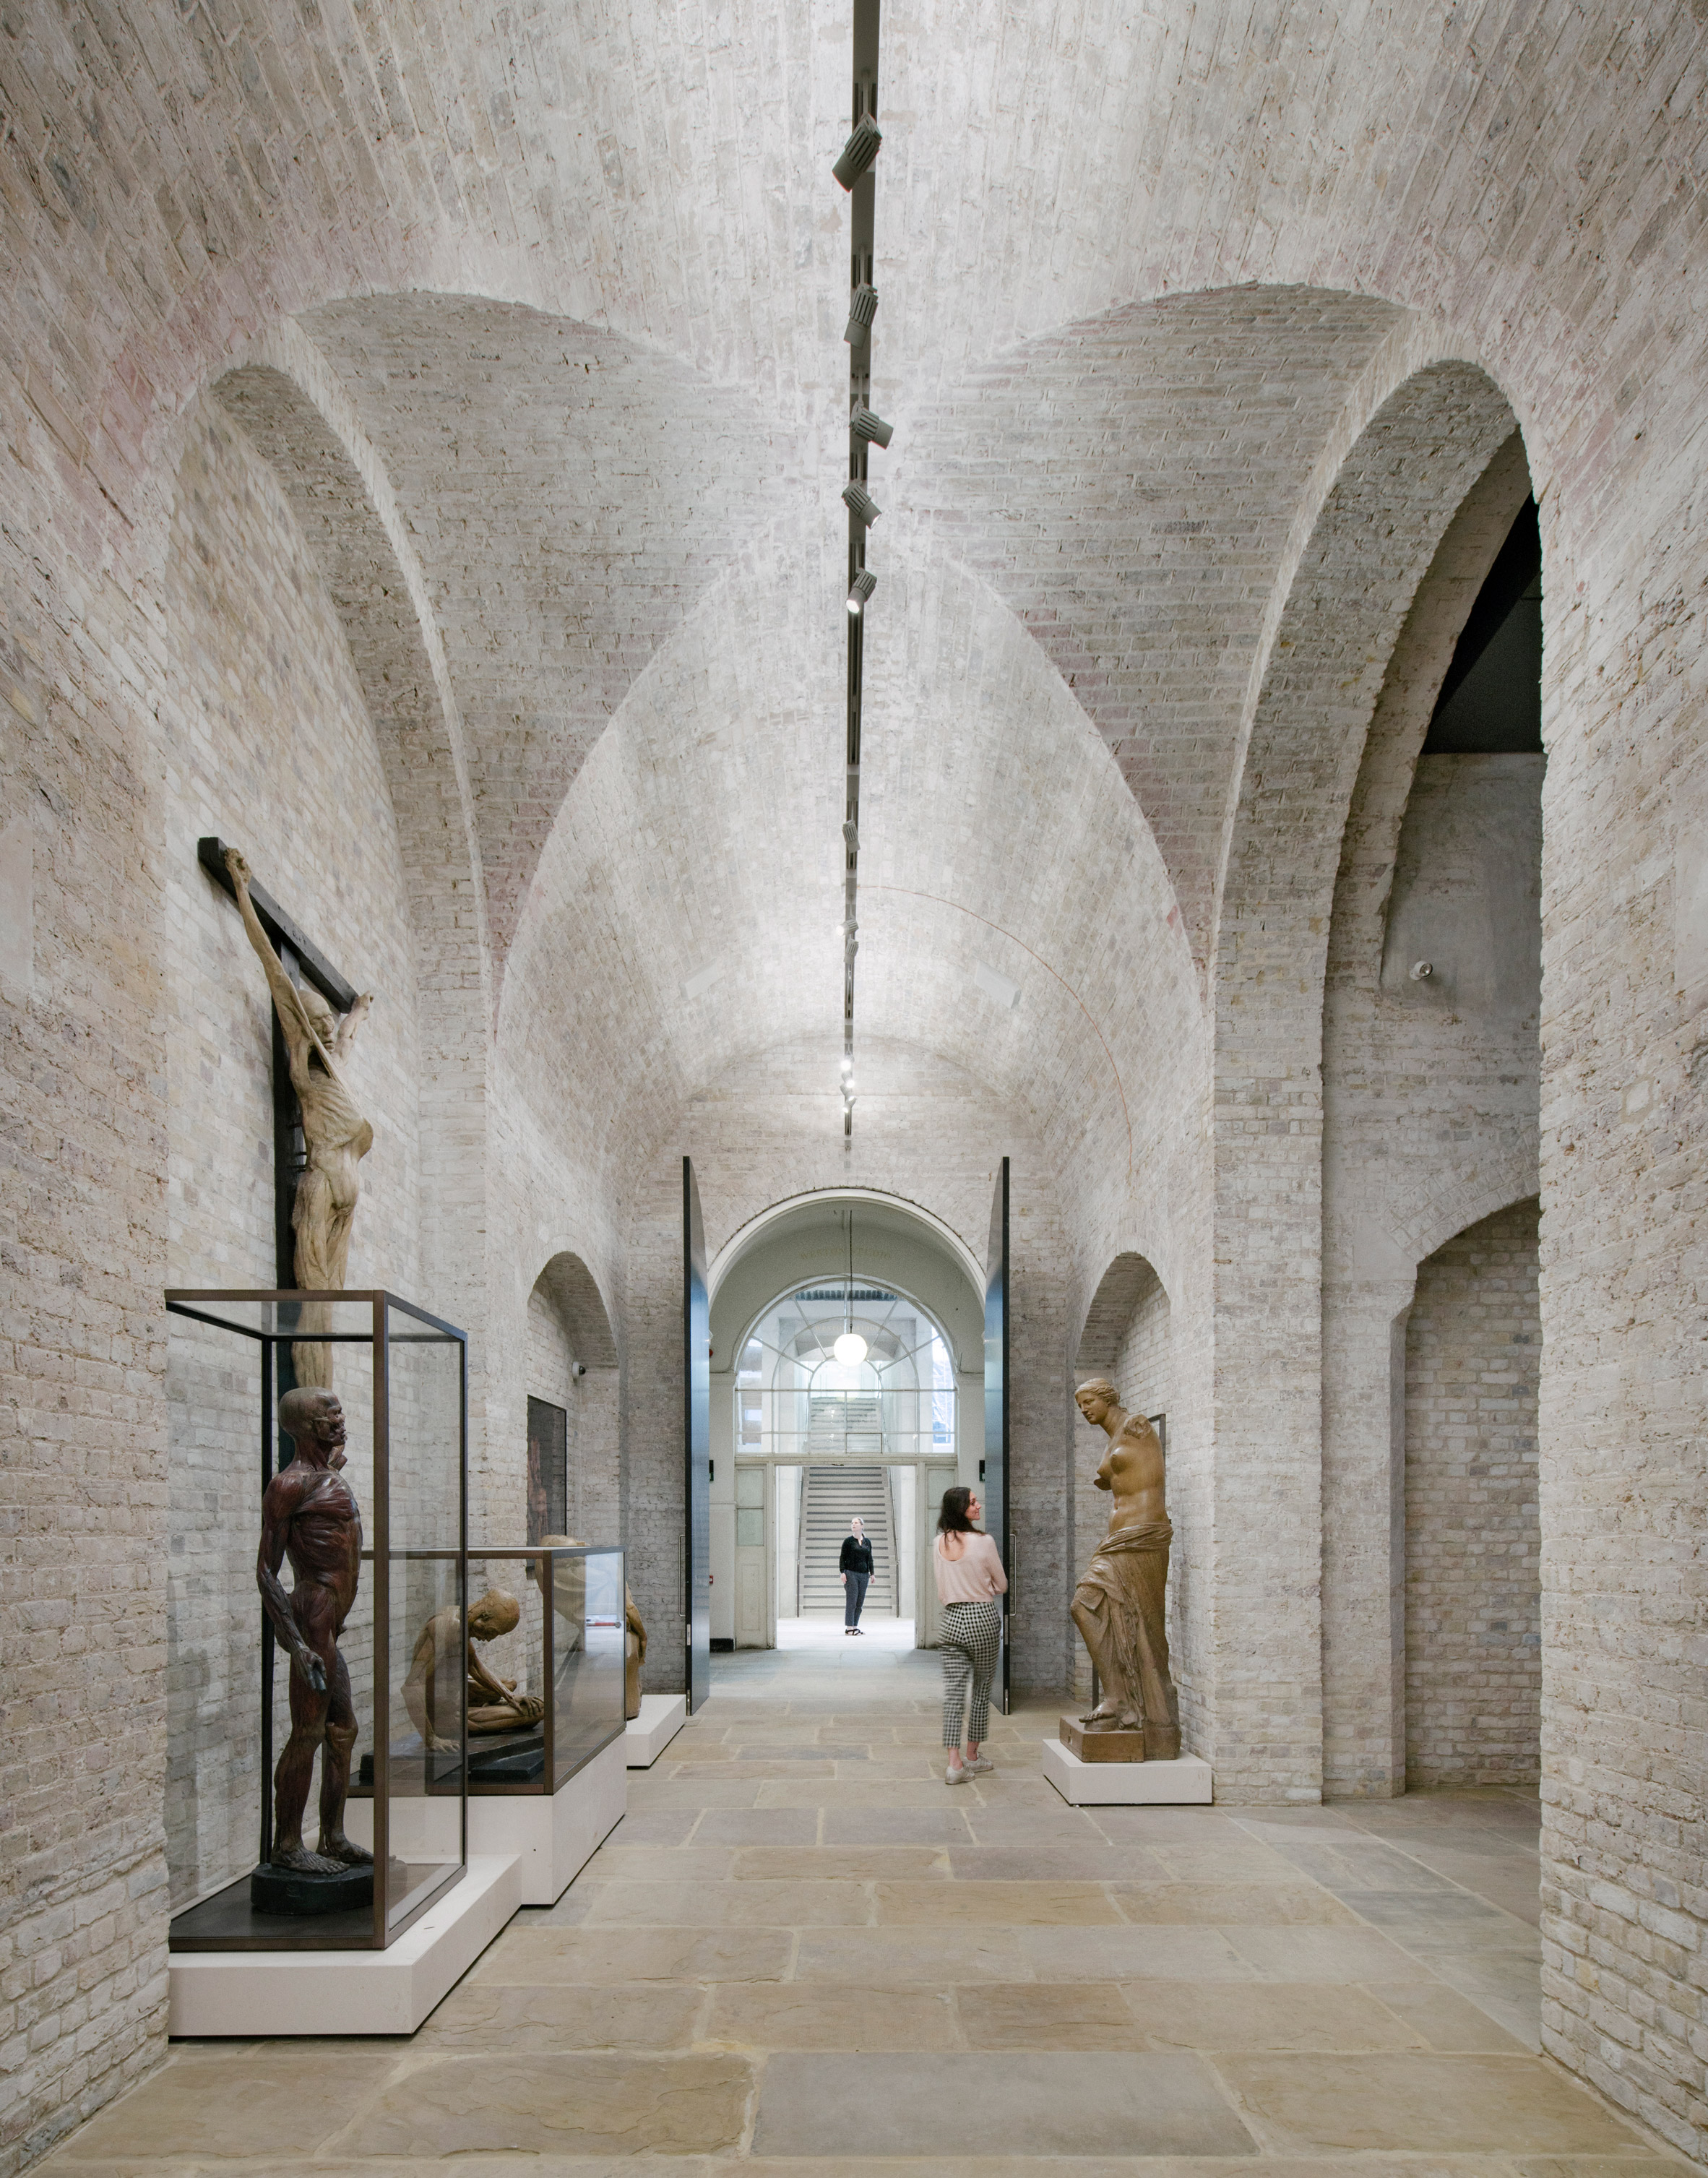 David Chipperfield's extension to London's Royal Academy